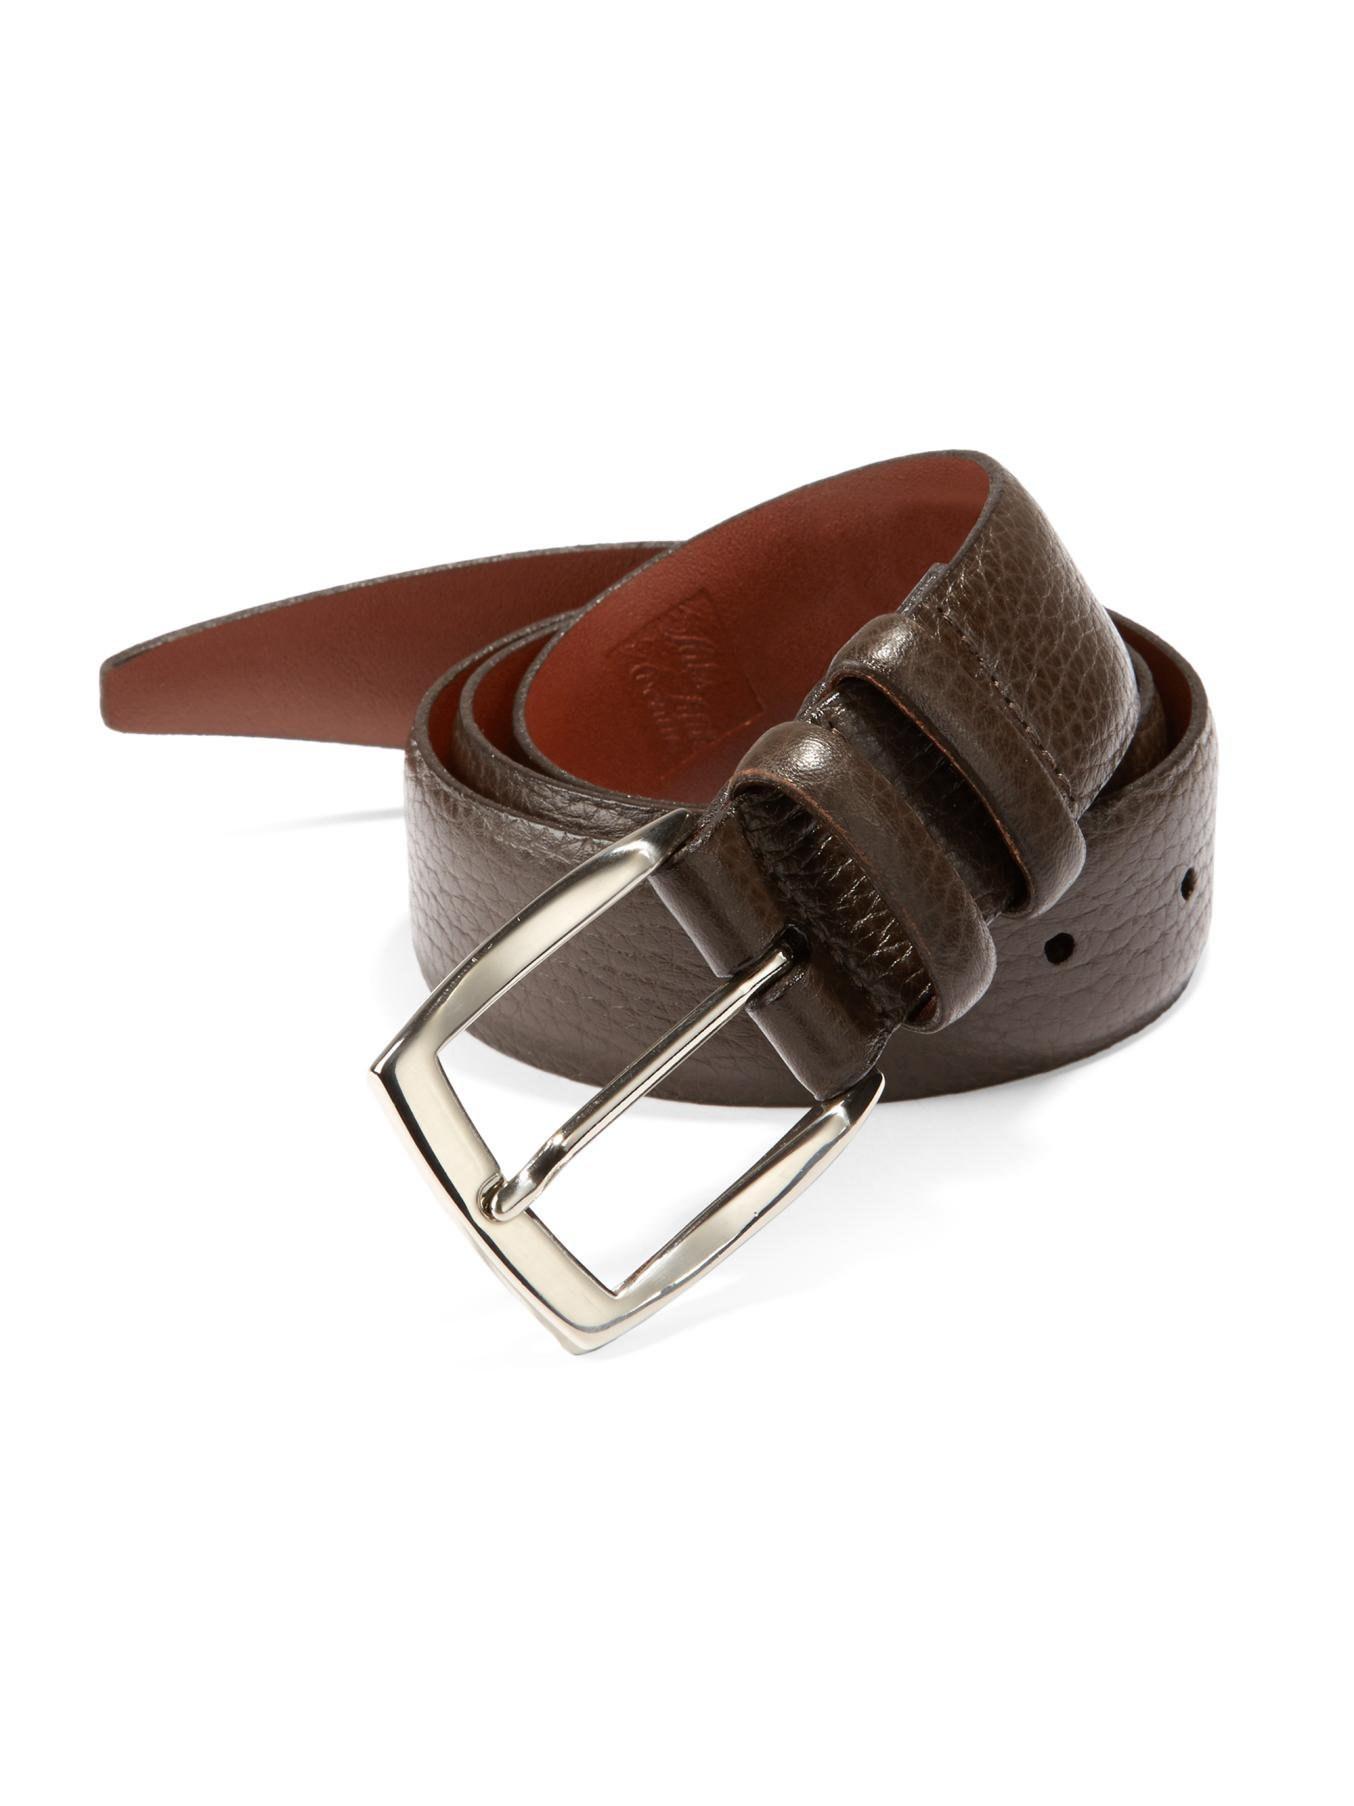 Lyst - Saks Fifth Avenue Tumbled Leather Belt in Brown for Men